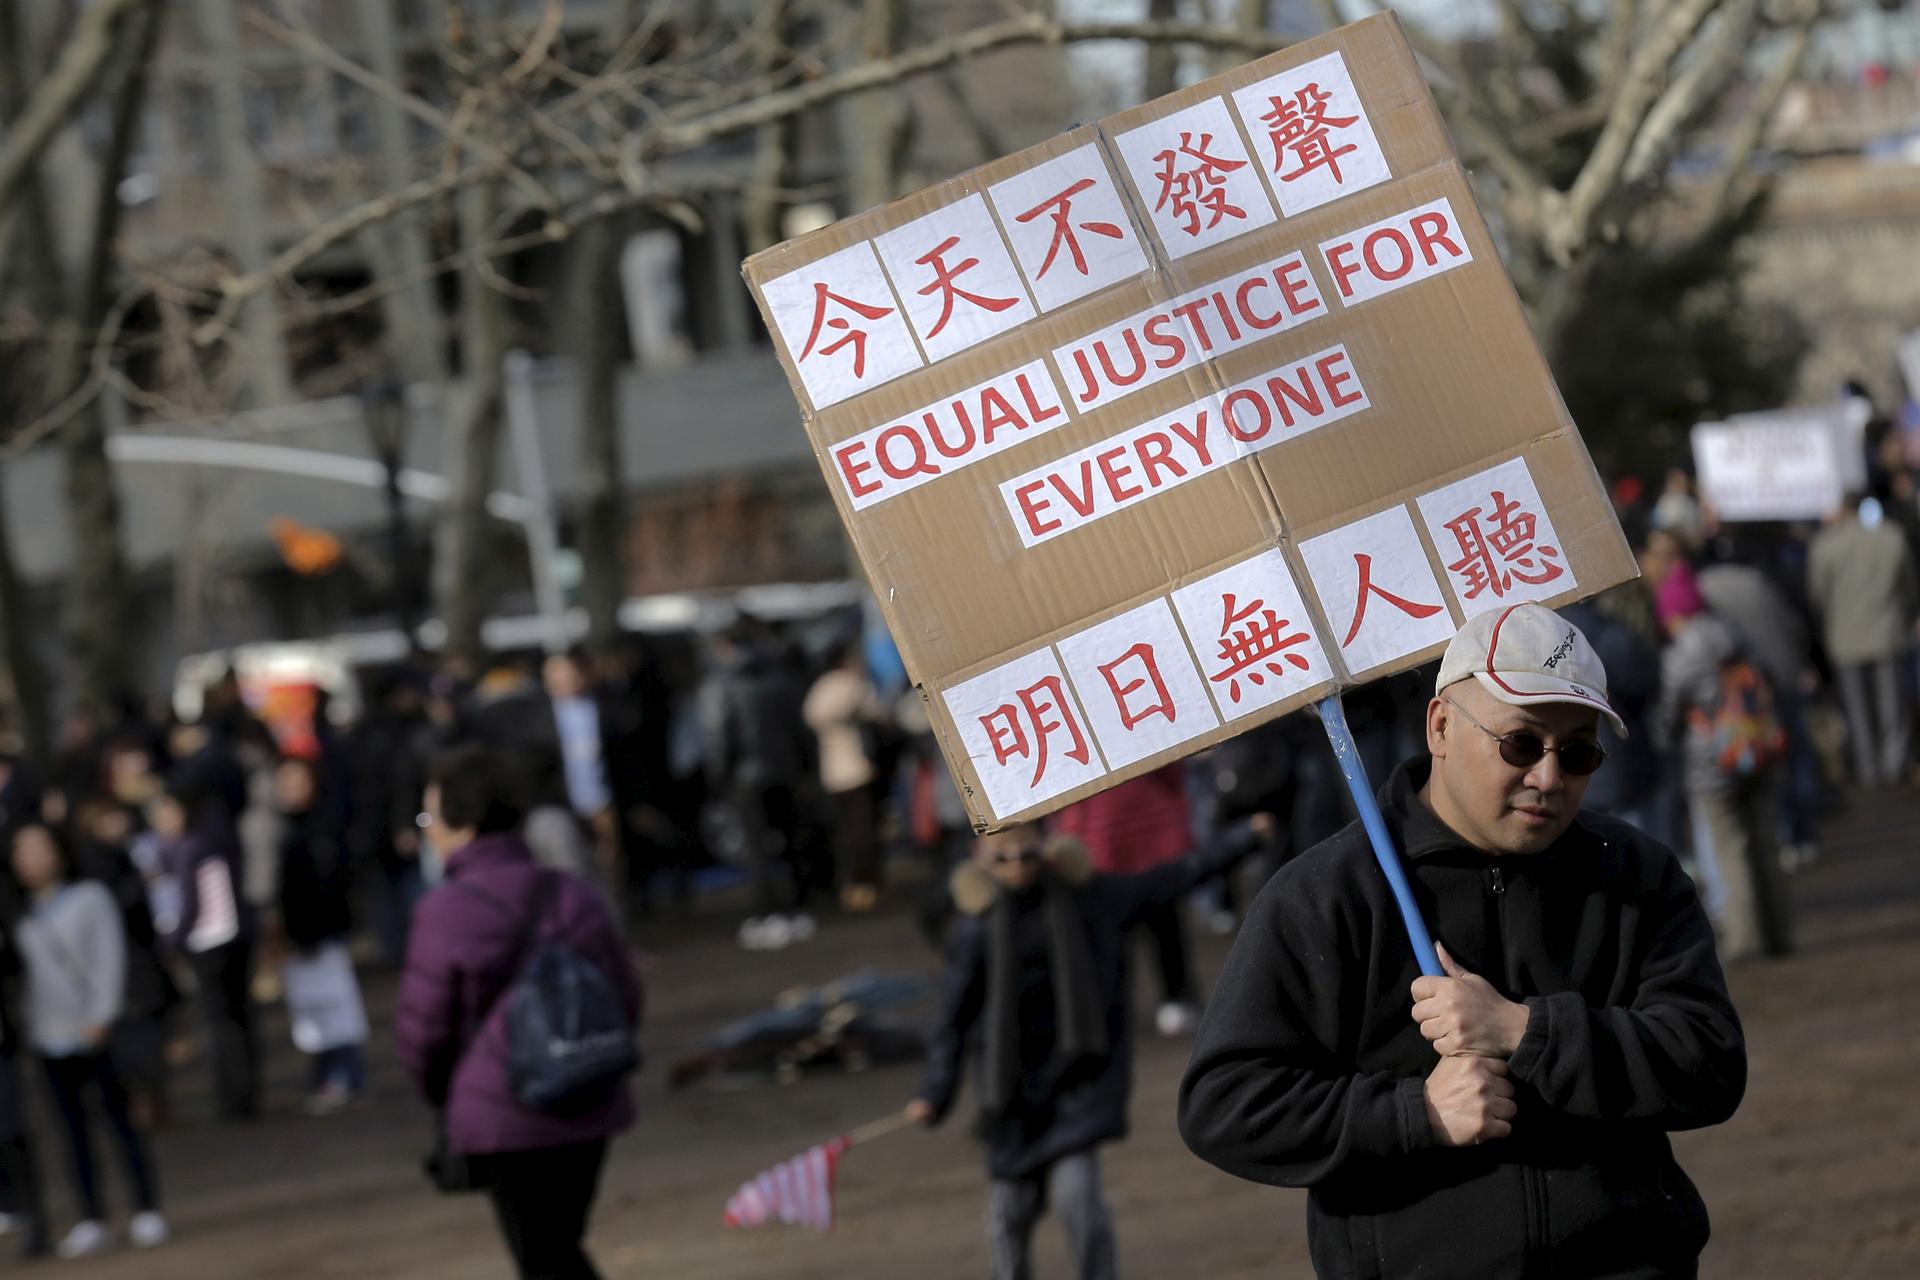 A man holds a sign that reads "All lives matter" in English and Chinese